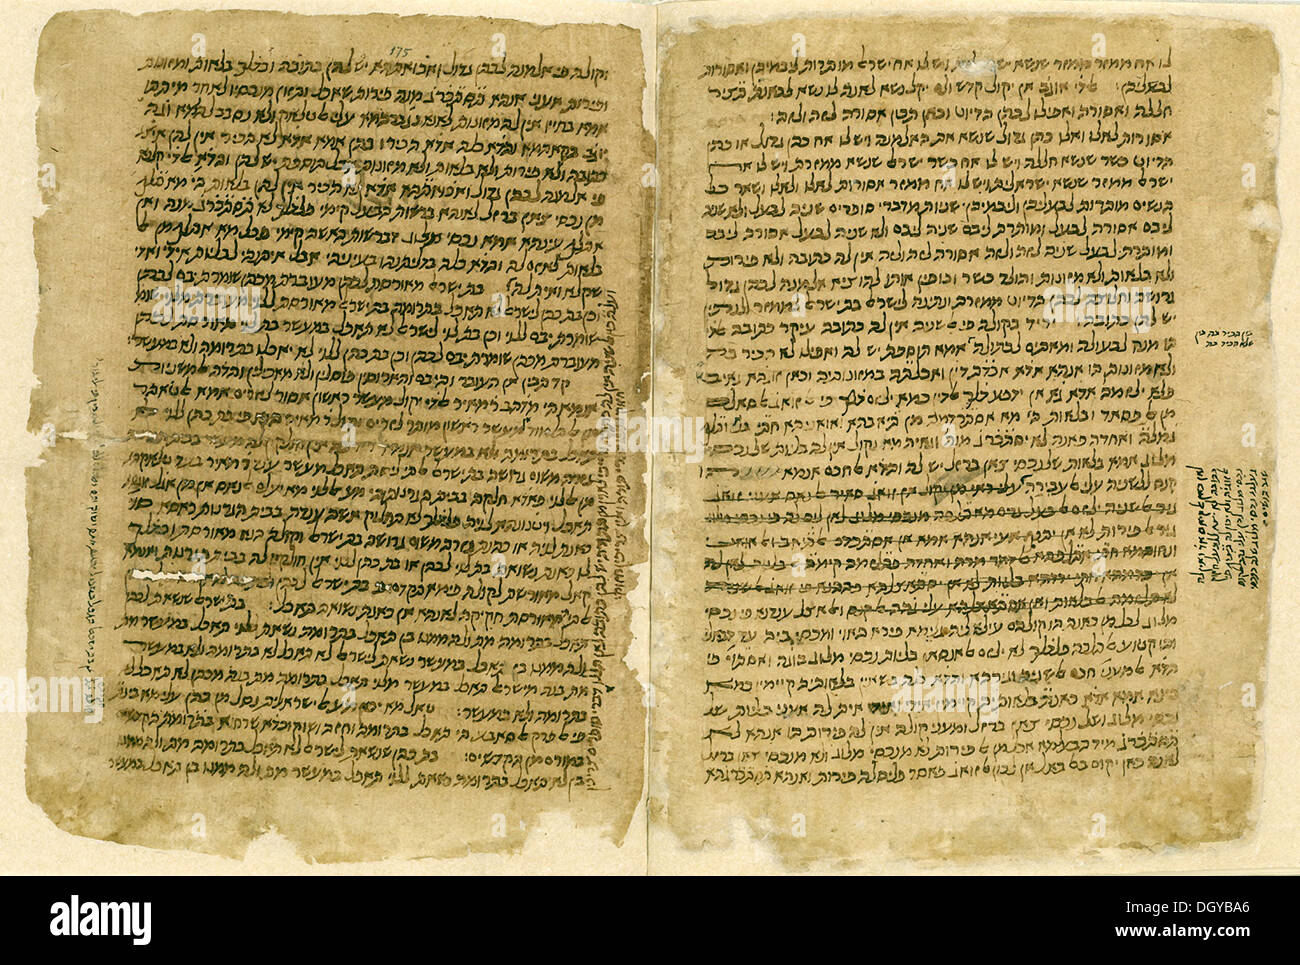 5639. Pages from Mishnah commentary in Judeo-Arabic script dating from the 12th. C. Stock Photo